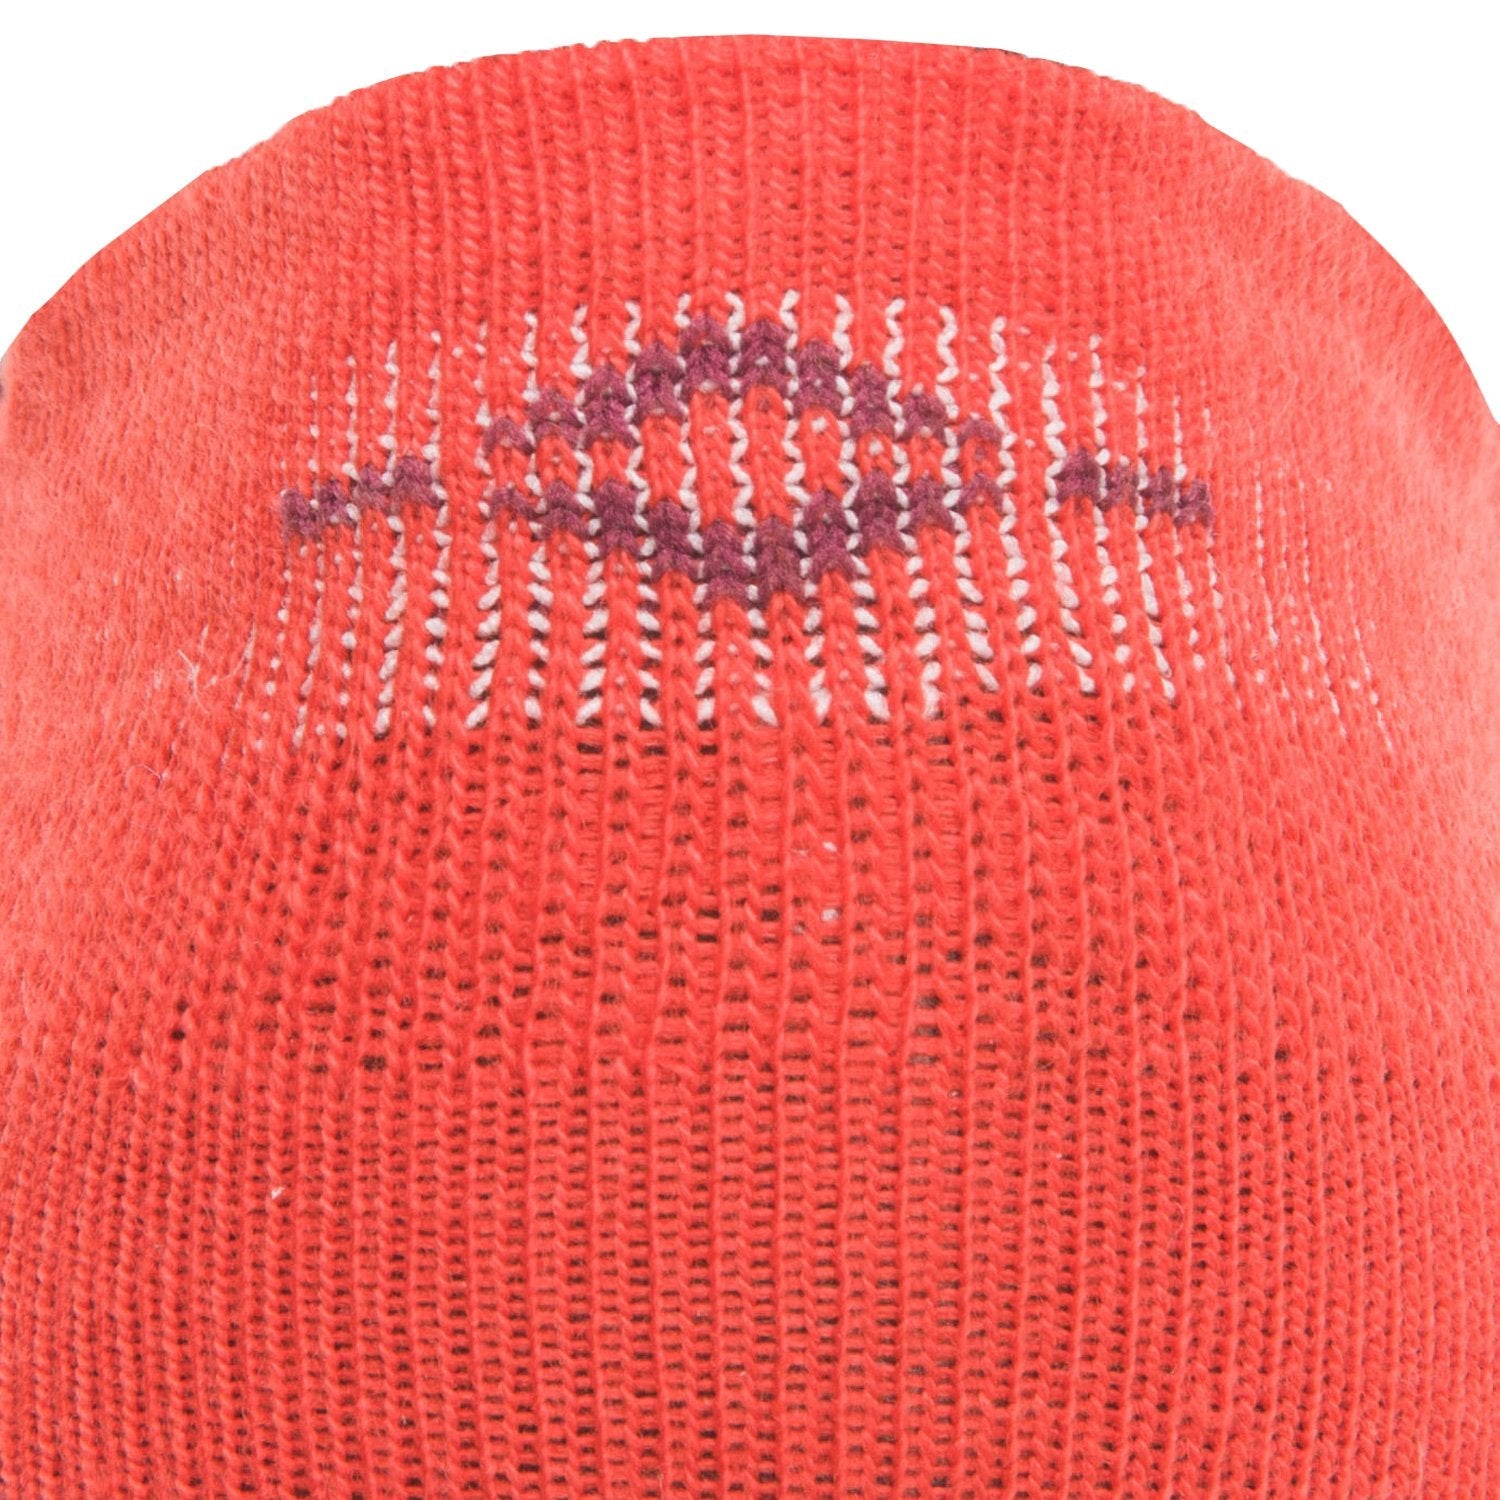 Catalyst Ultra-lightweight Low Cut Sock - Coto Fiery Red cuff perspective - made in The USA Wigwam Socks